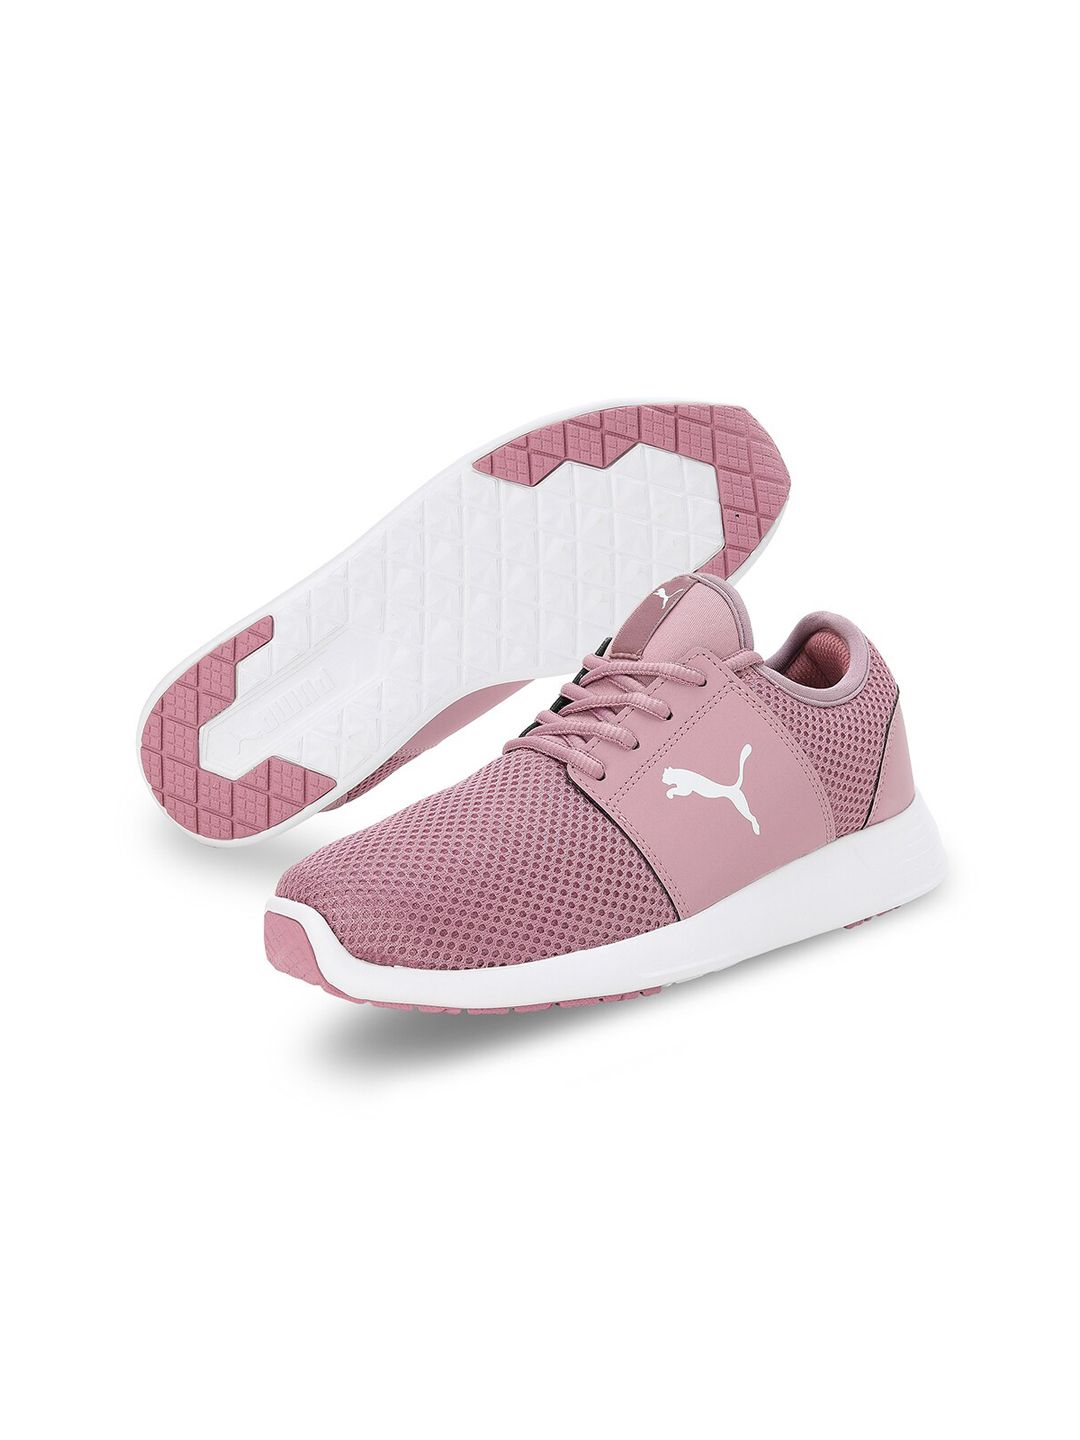 Puma Women Purple Puma Kendall Women's Shoes Woven Design High-Top Sneakers Price in India